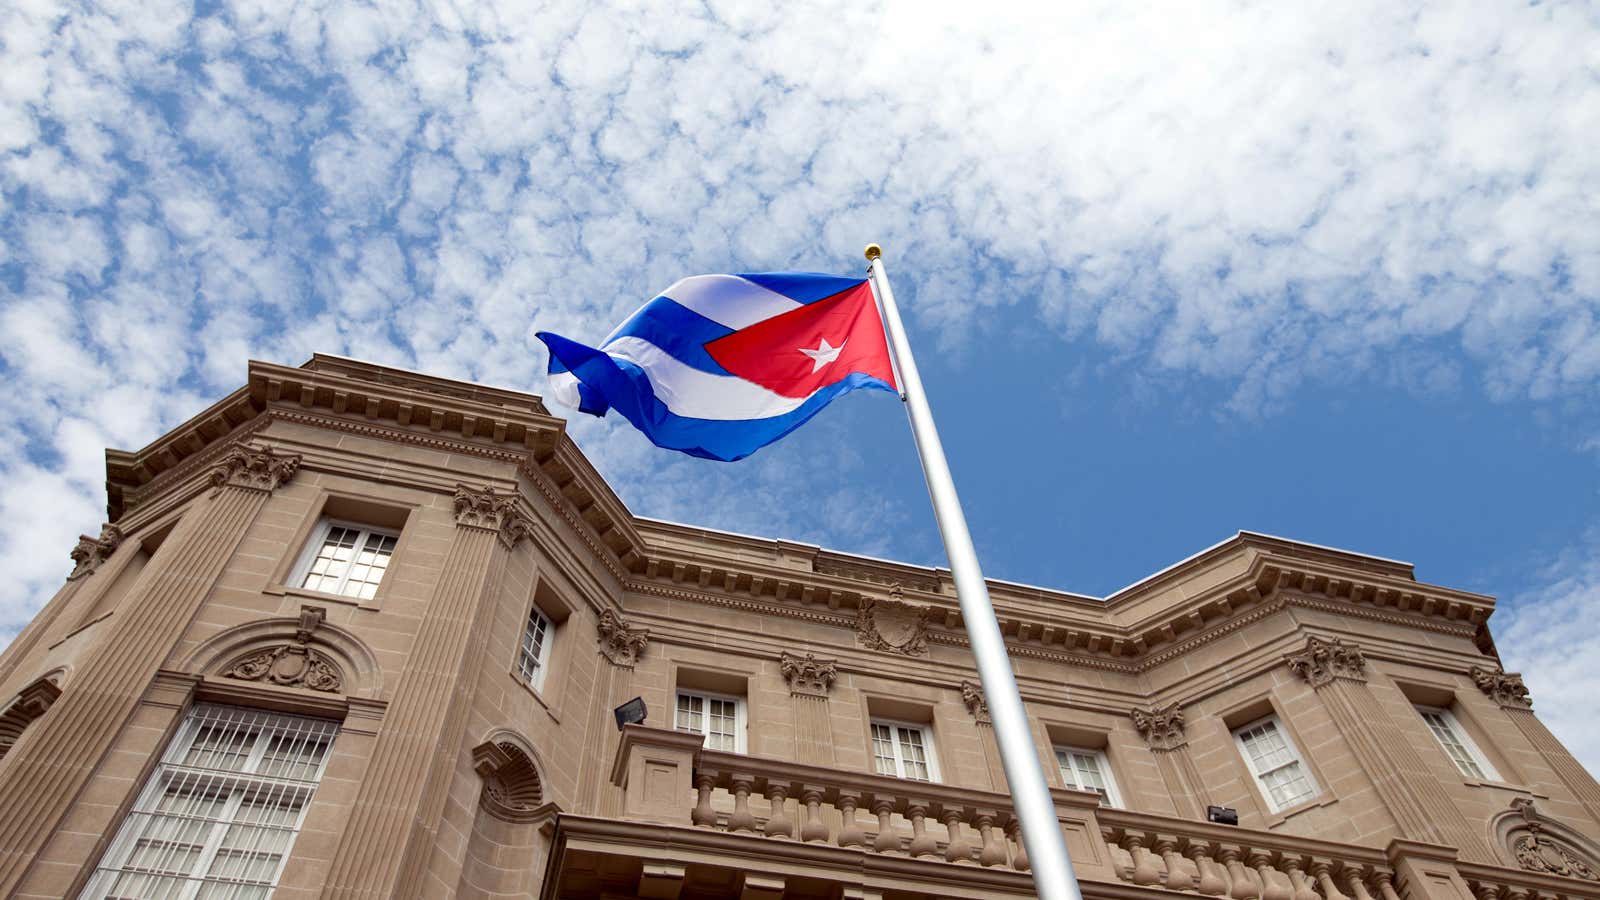 The Cuban flag flies above its US embassy for the first time since 1961.